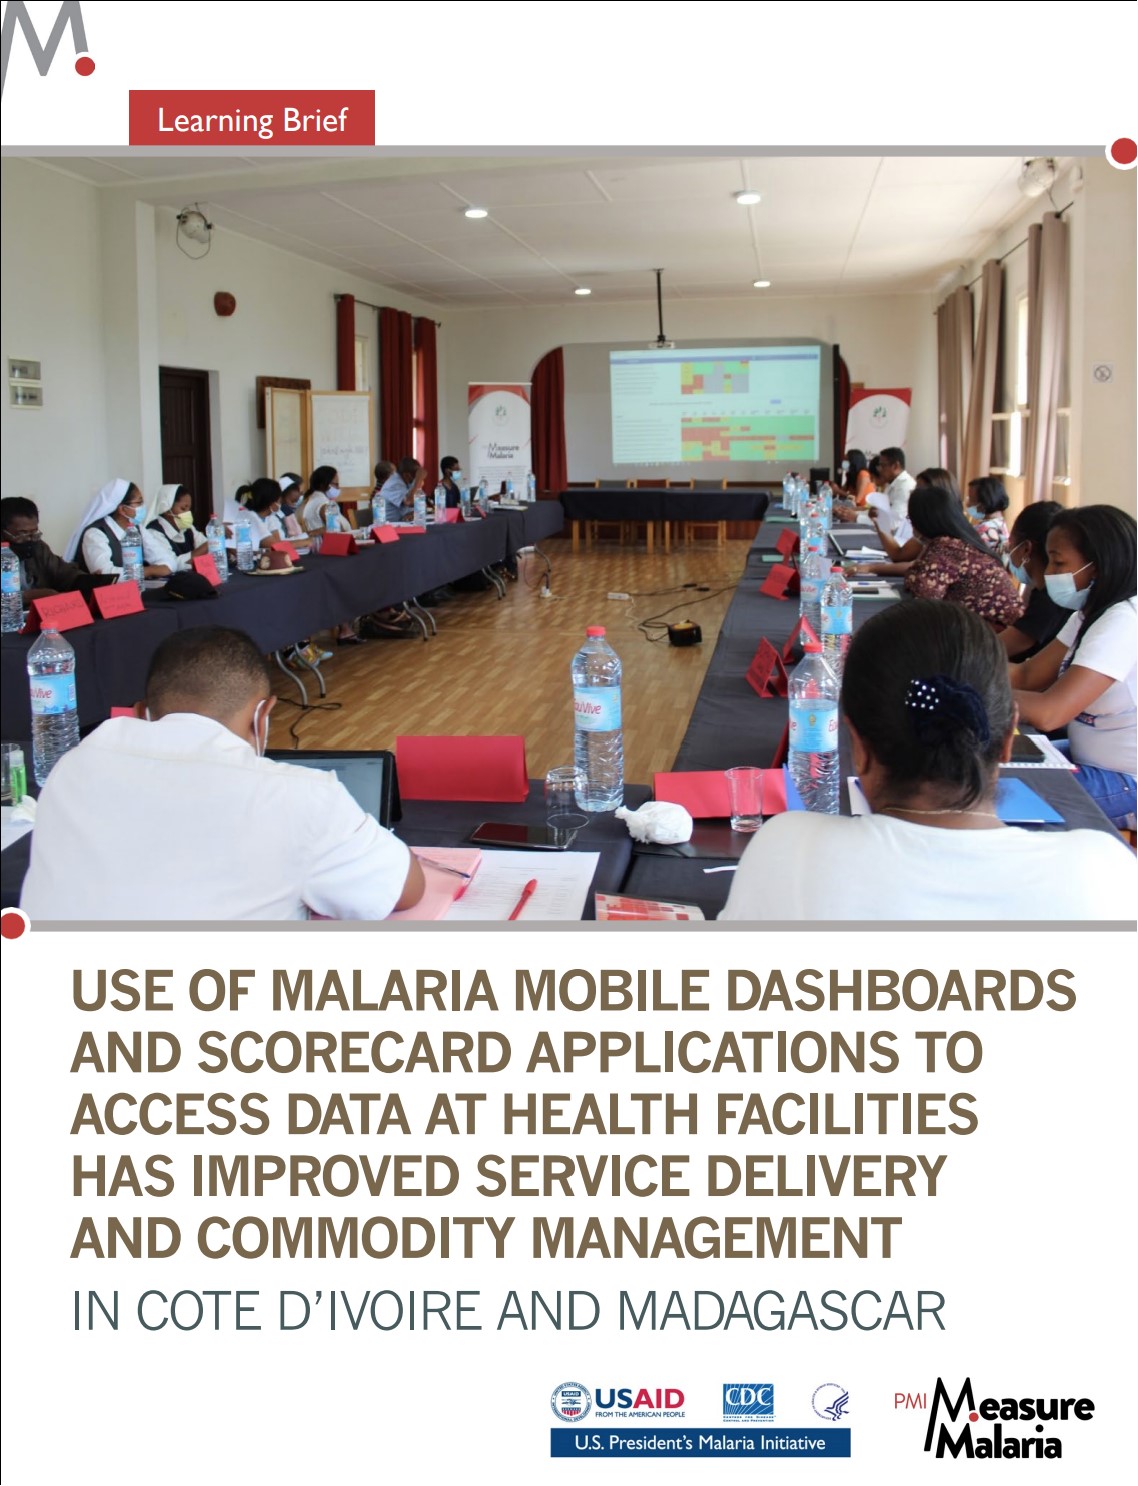 Use of Malaria Mobile Dashboards and Scorecard Applications to Access Data at Health Facilities Has Improved Service Delivery and Commodity Management in Cote D’Ivoire and Madagascar